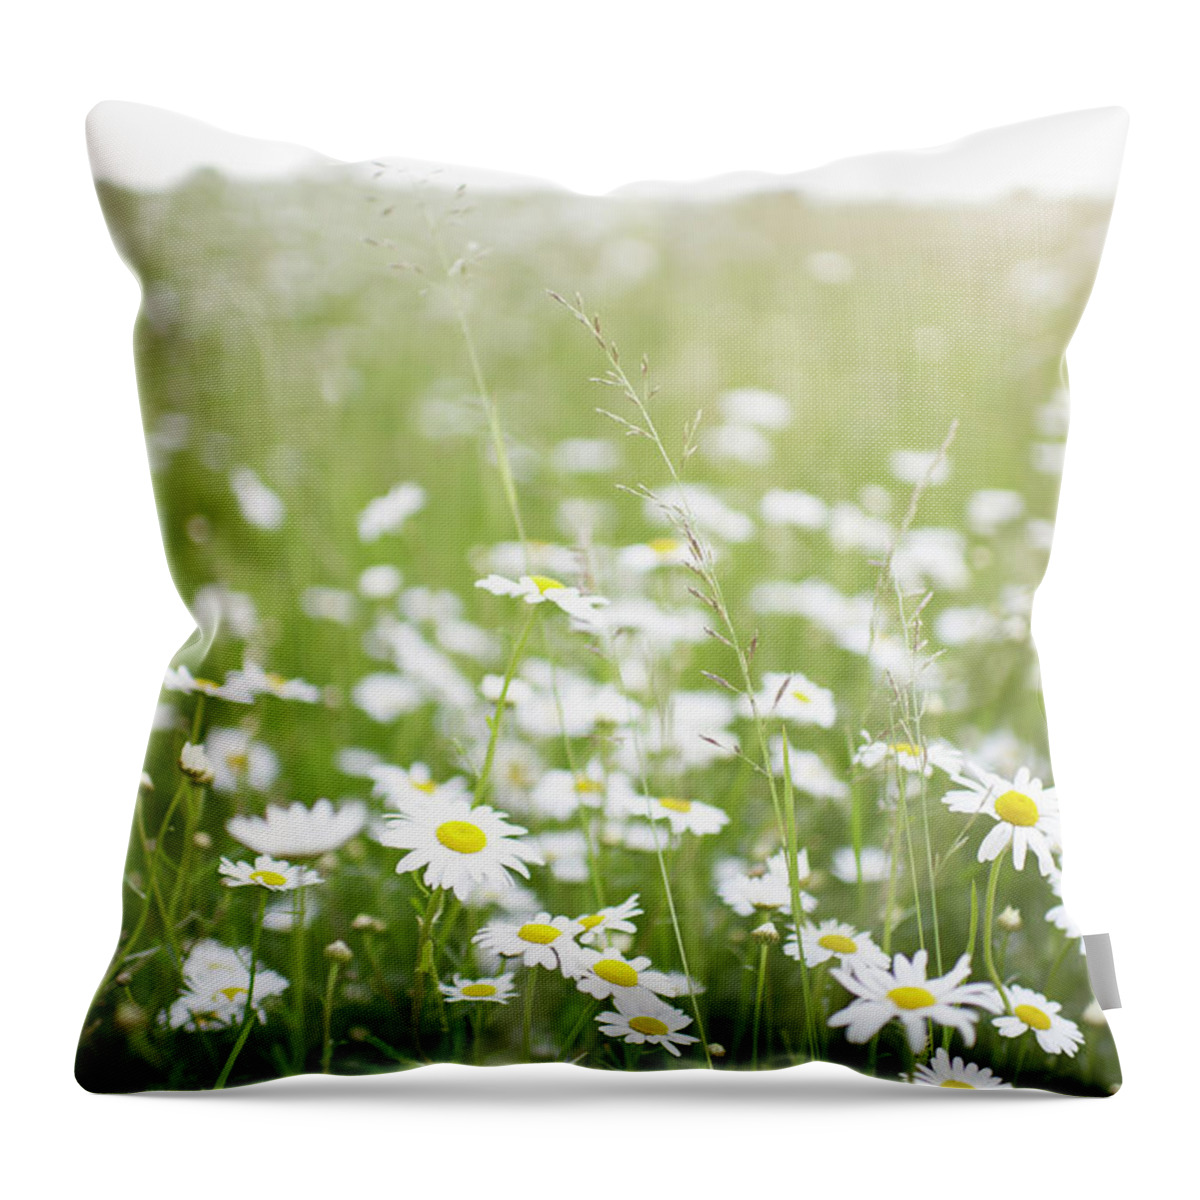 Grass Throw Pillow featuring the photograph Daisies Growing In A Country Meadow by Dougal Waters